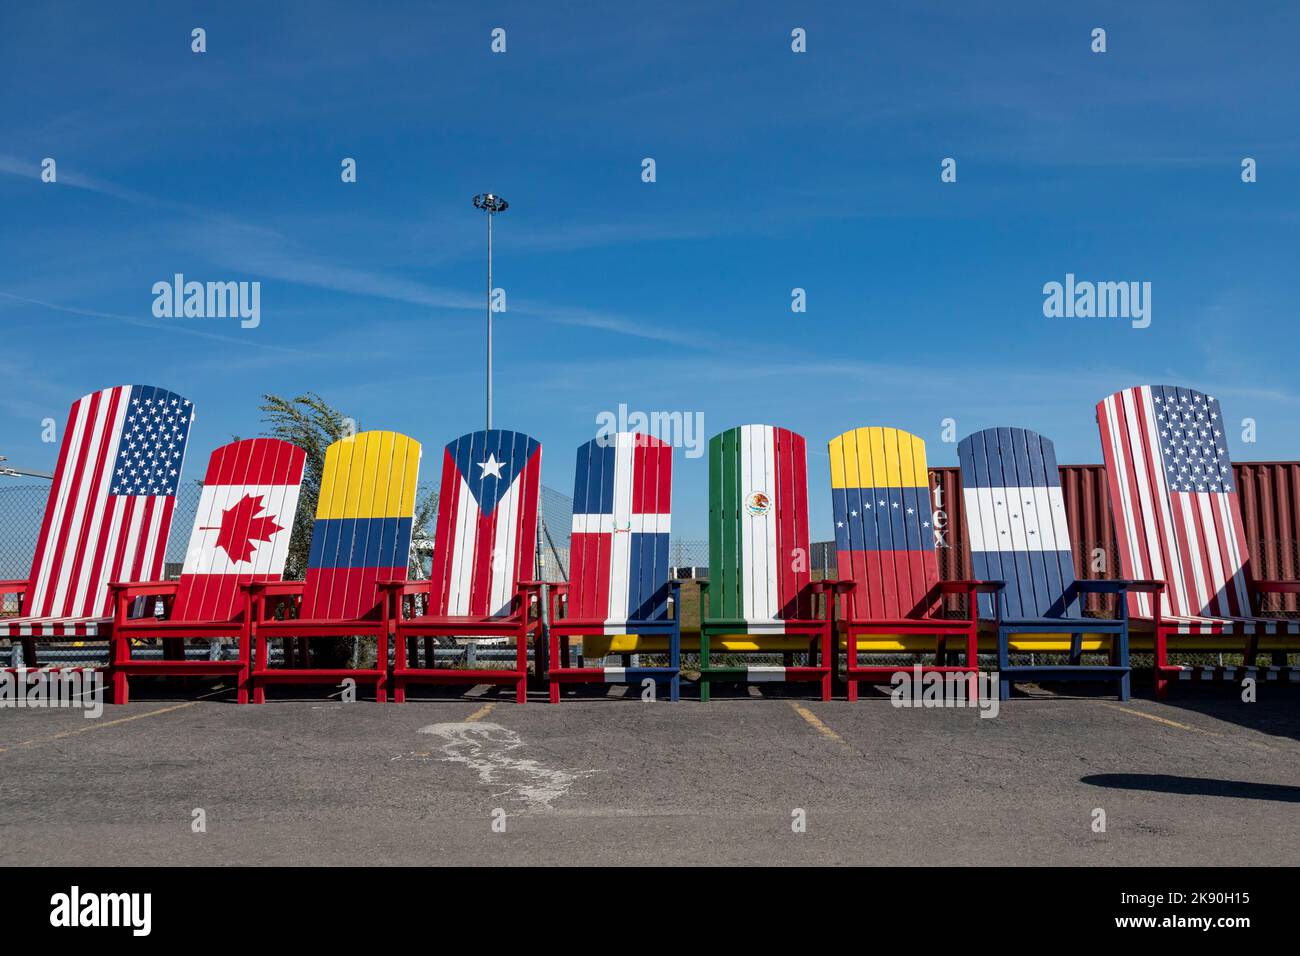 Detroit, Michigan - Large chairs painted as flags outside the Poronga Splash car wash in southwest Detroit. The flags represent the home countries of Stock Photo